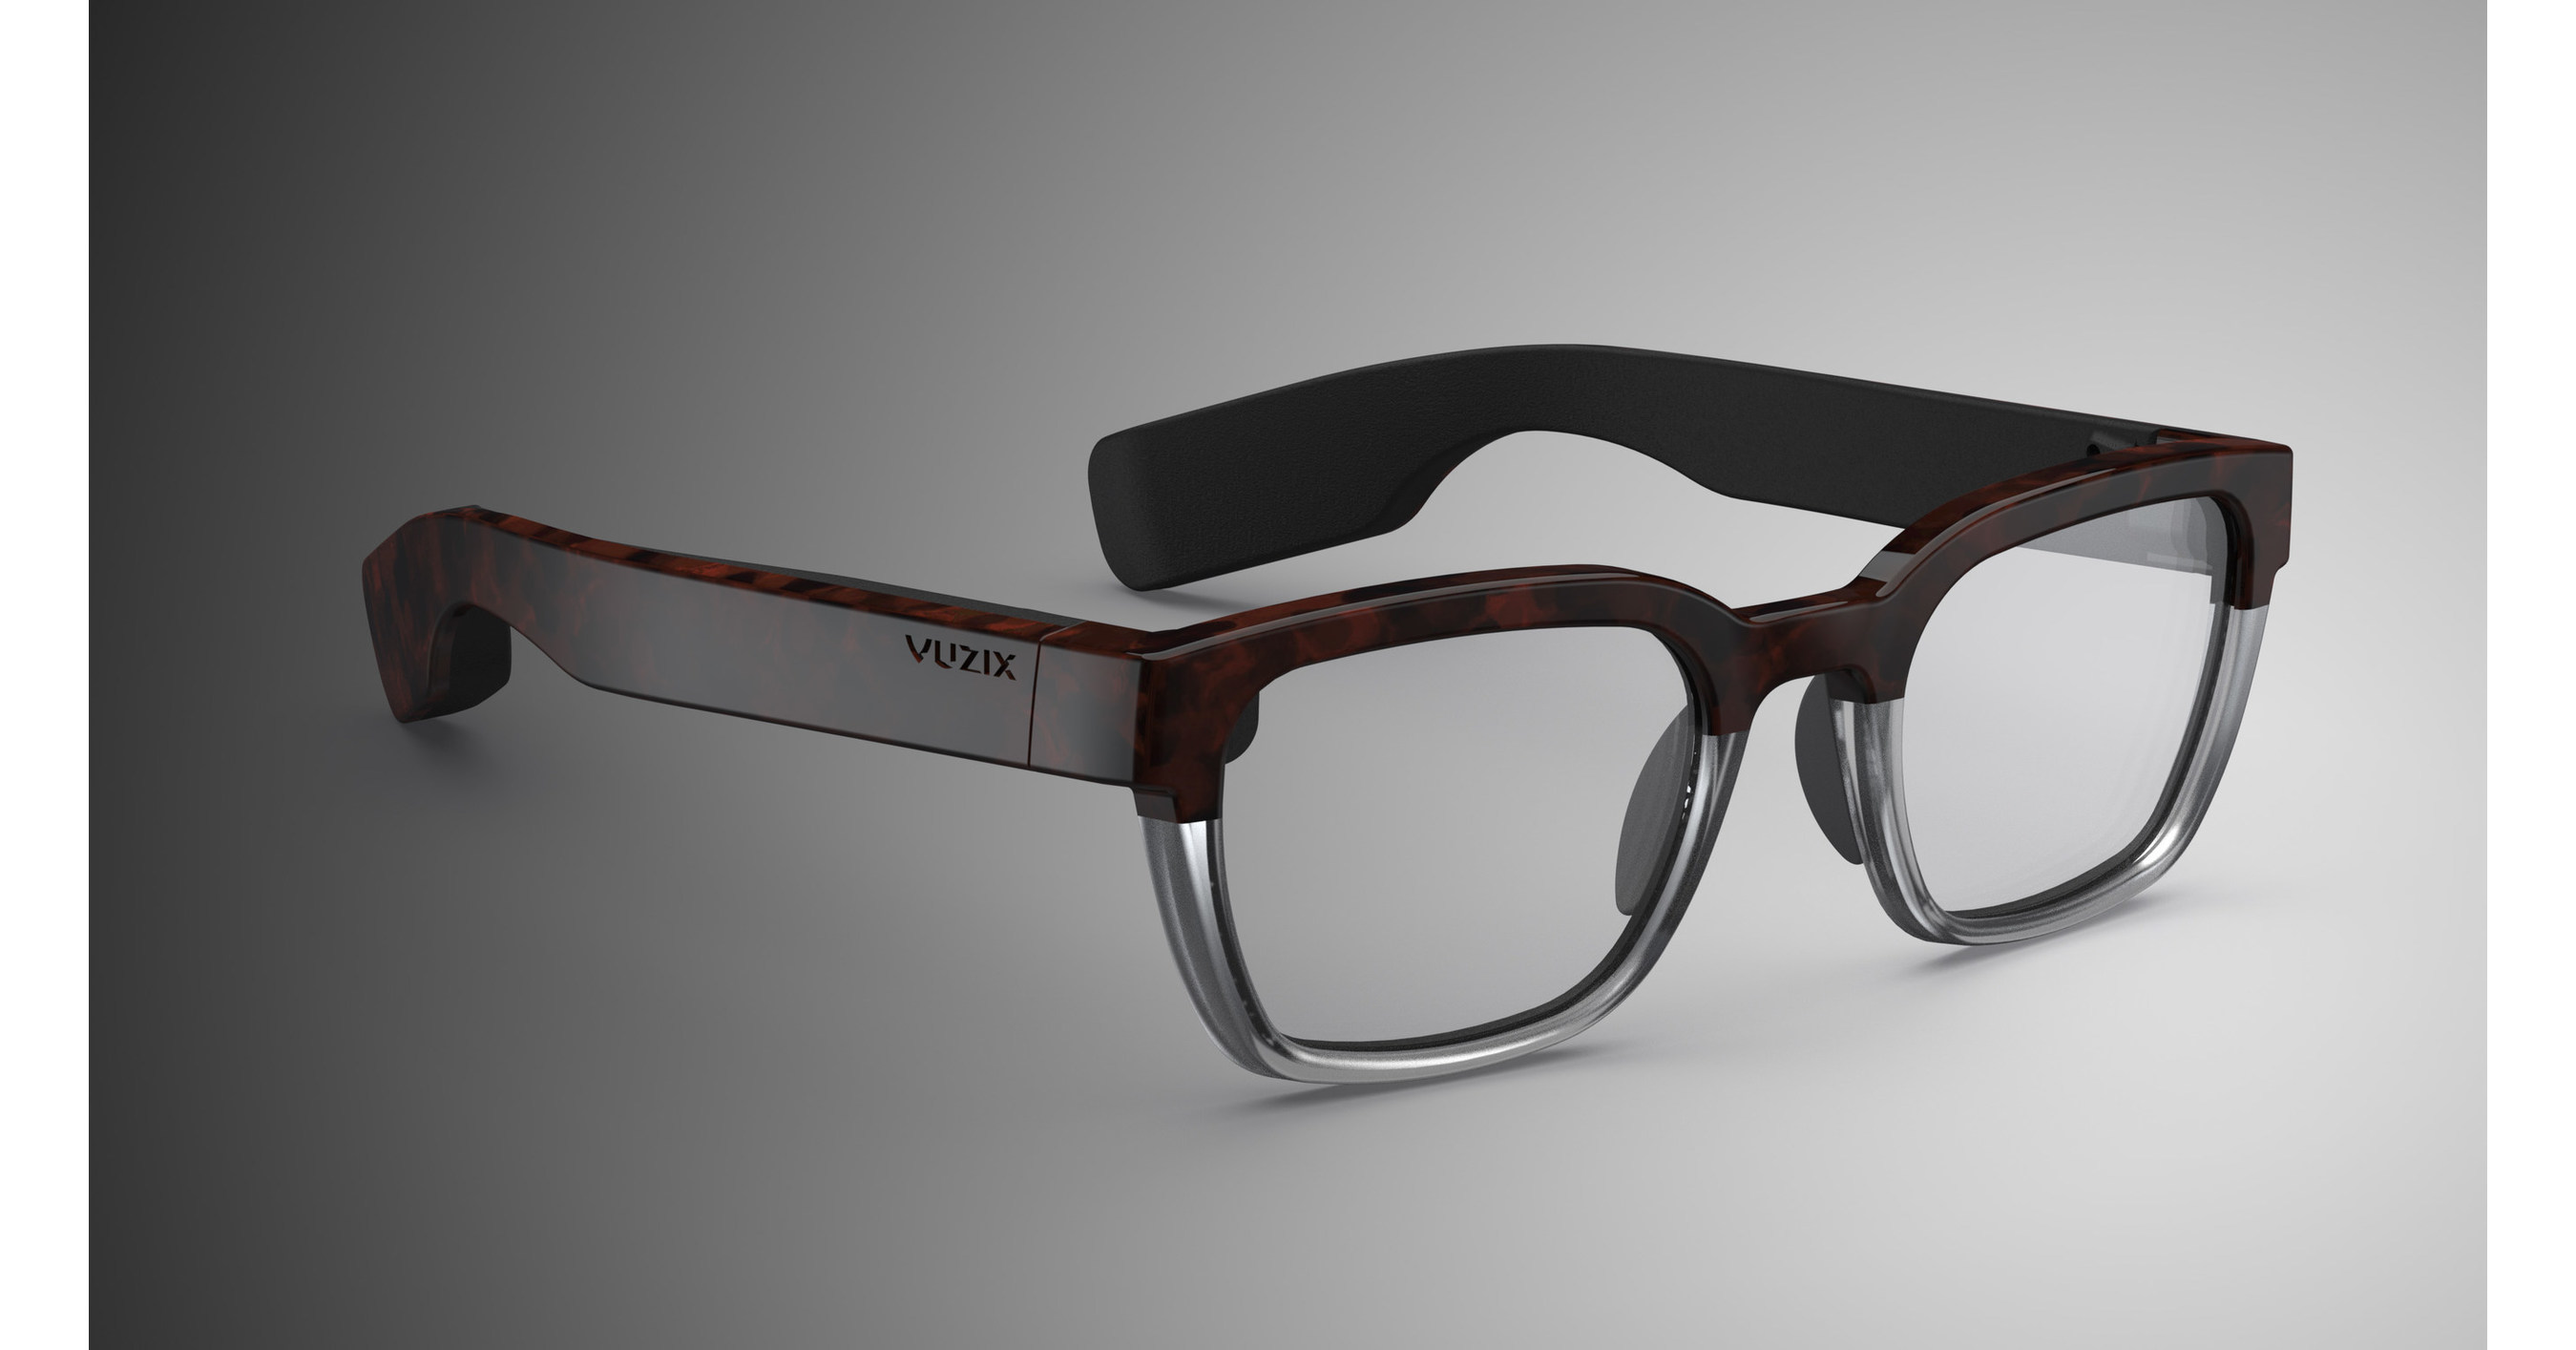 Vuzix Highlights its Growing Augmented Reality Smart Glasses